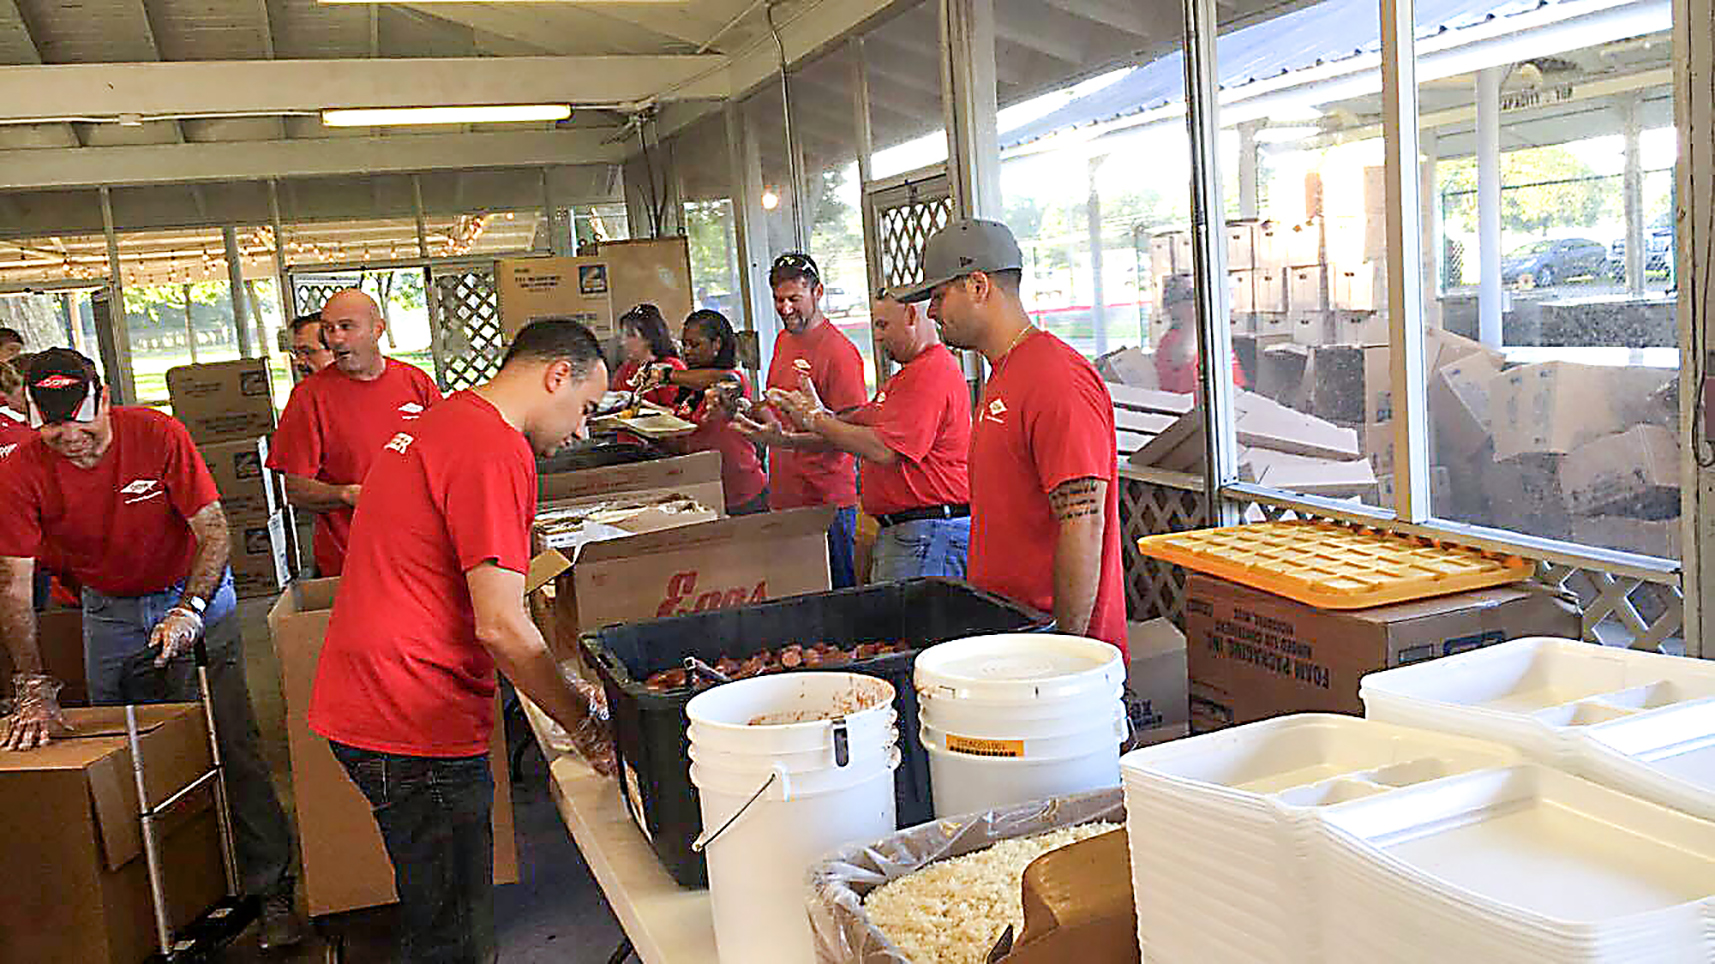 After the August flooding, Dow fed 5,000 people from its Dow Louisiana Operations site. Workers from the St. Charles Operations site came and cooked for their colleagues at the site near Plaquemine, saying they were “returning a favor” from when Plaquemine employees cooked for the St. Charles Operations team after Hurricane Katrina.